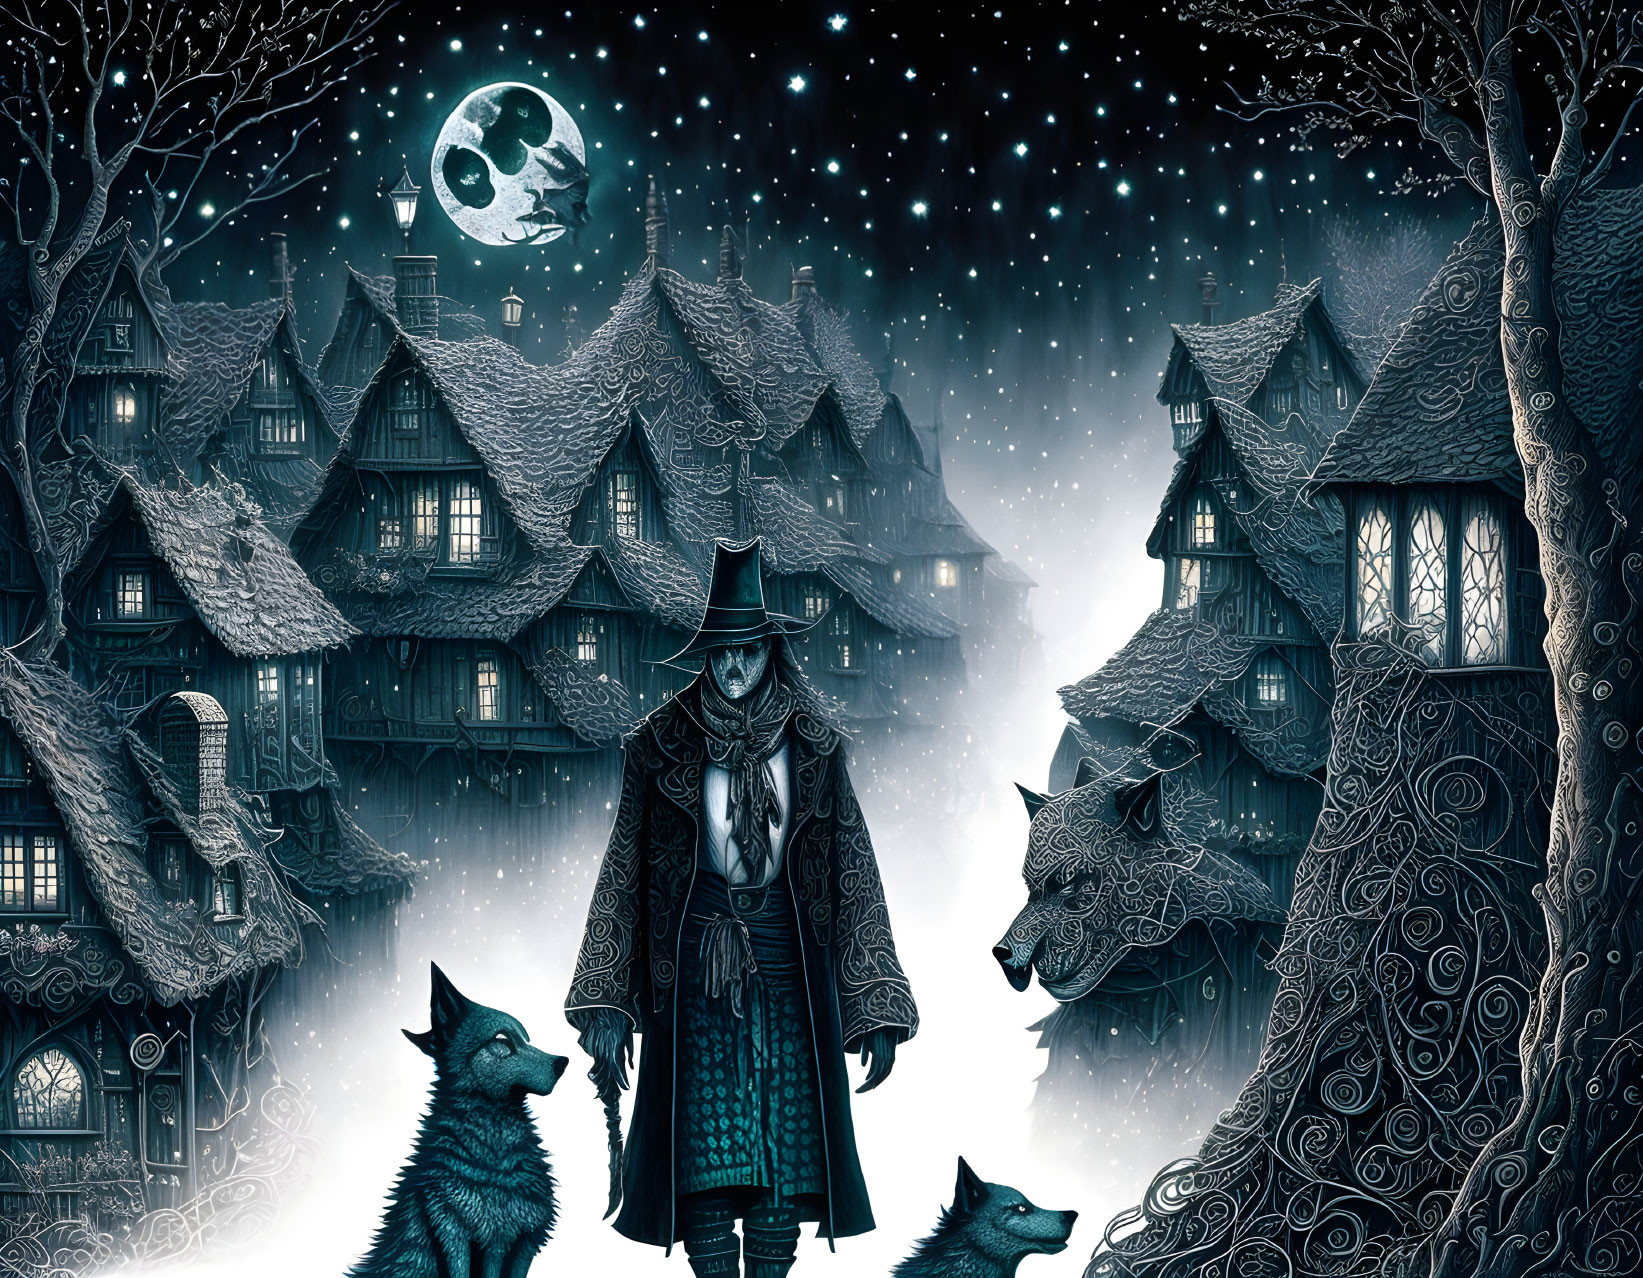 Mysterious figure in hat in snowy village with wolves under starry sky